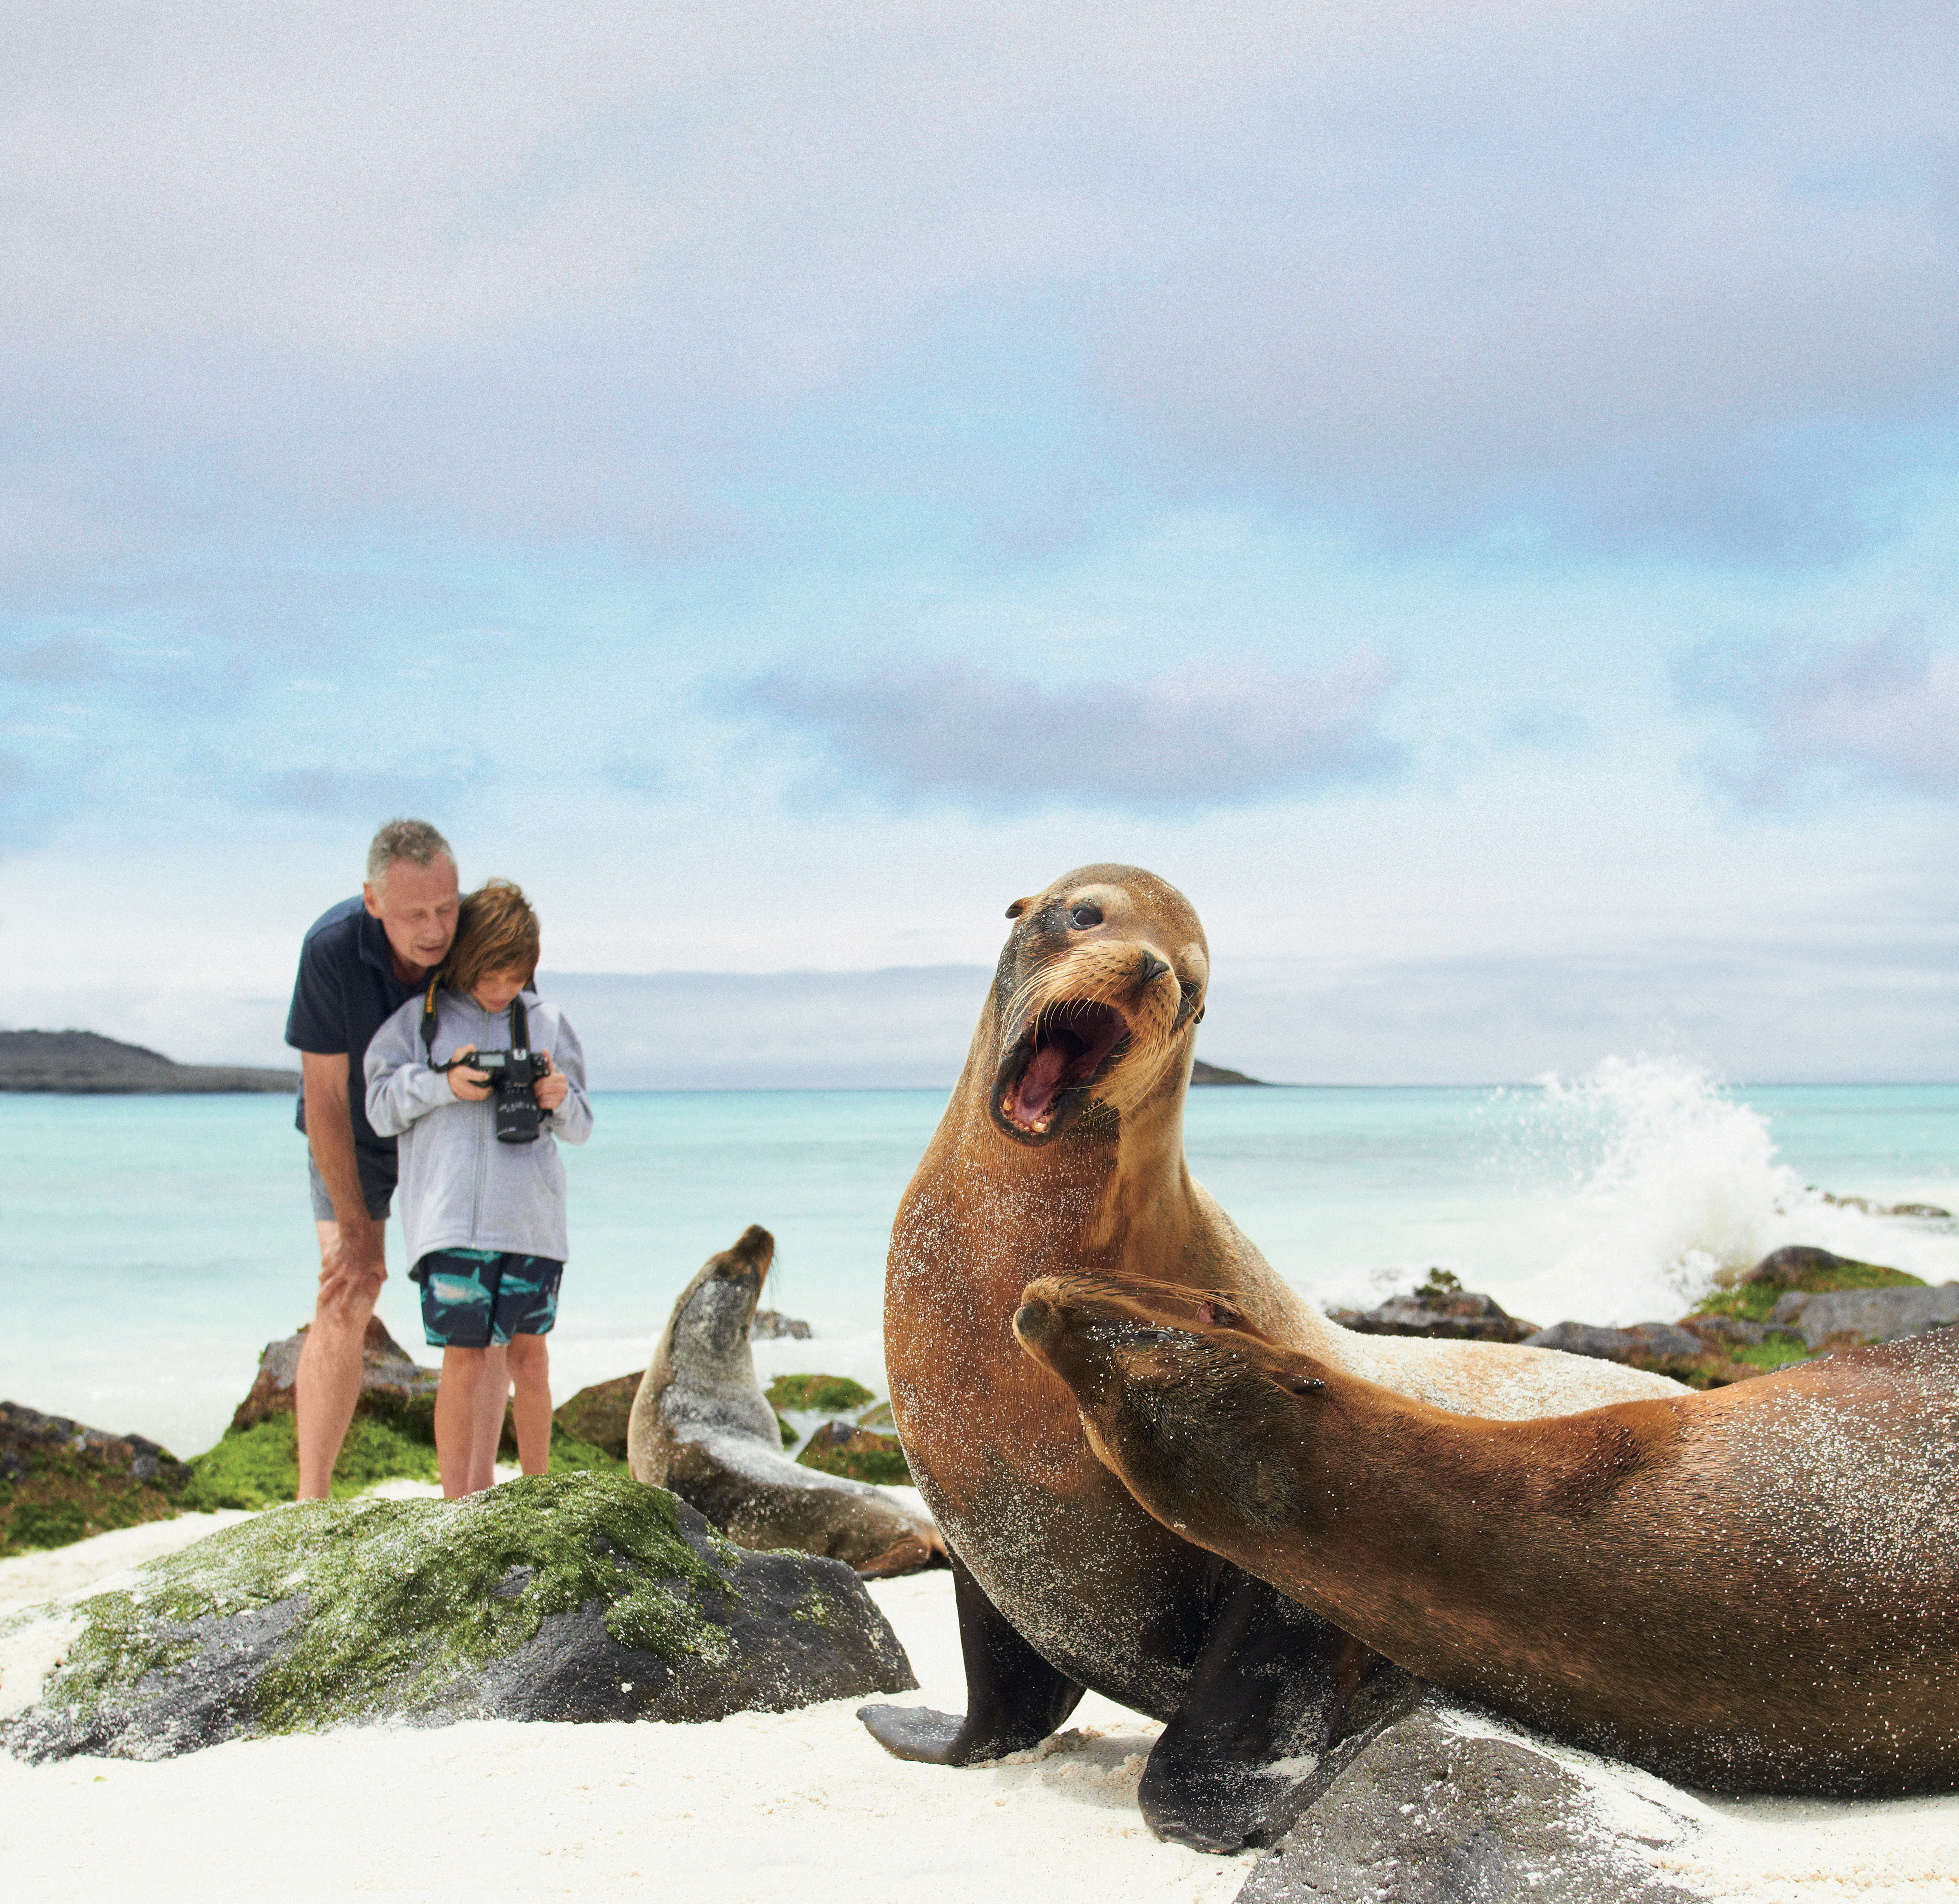 Expedition Travel With Lindblad-National Geographic